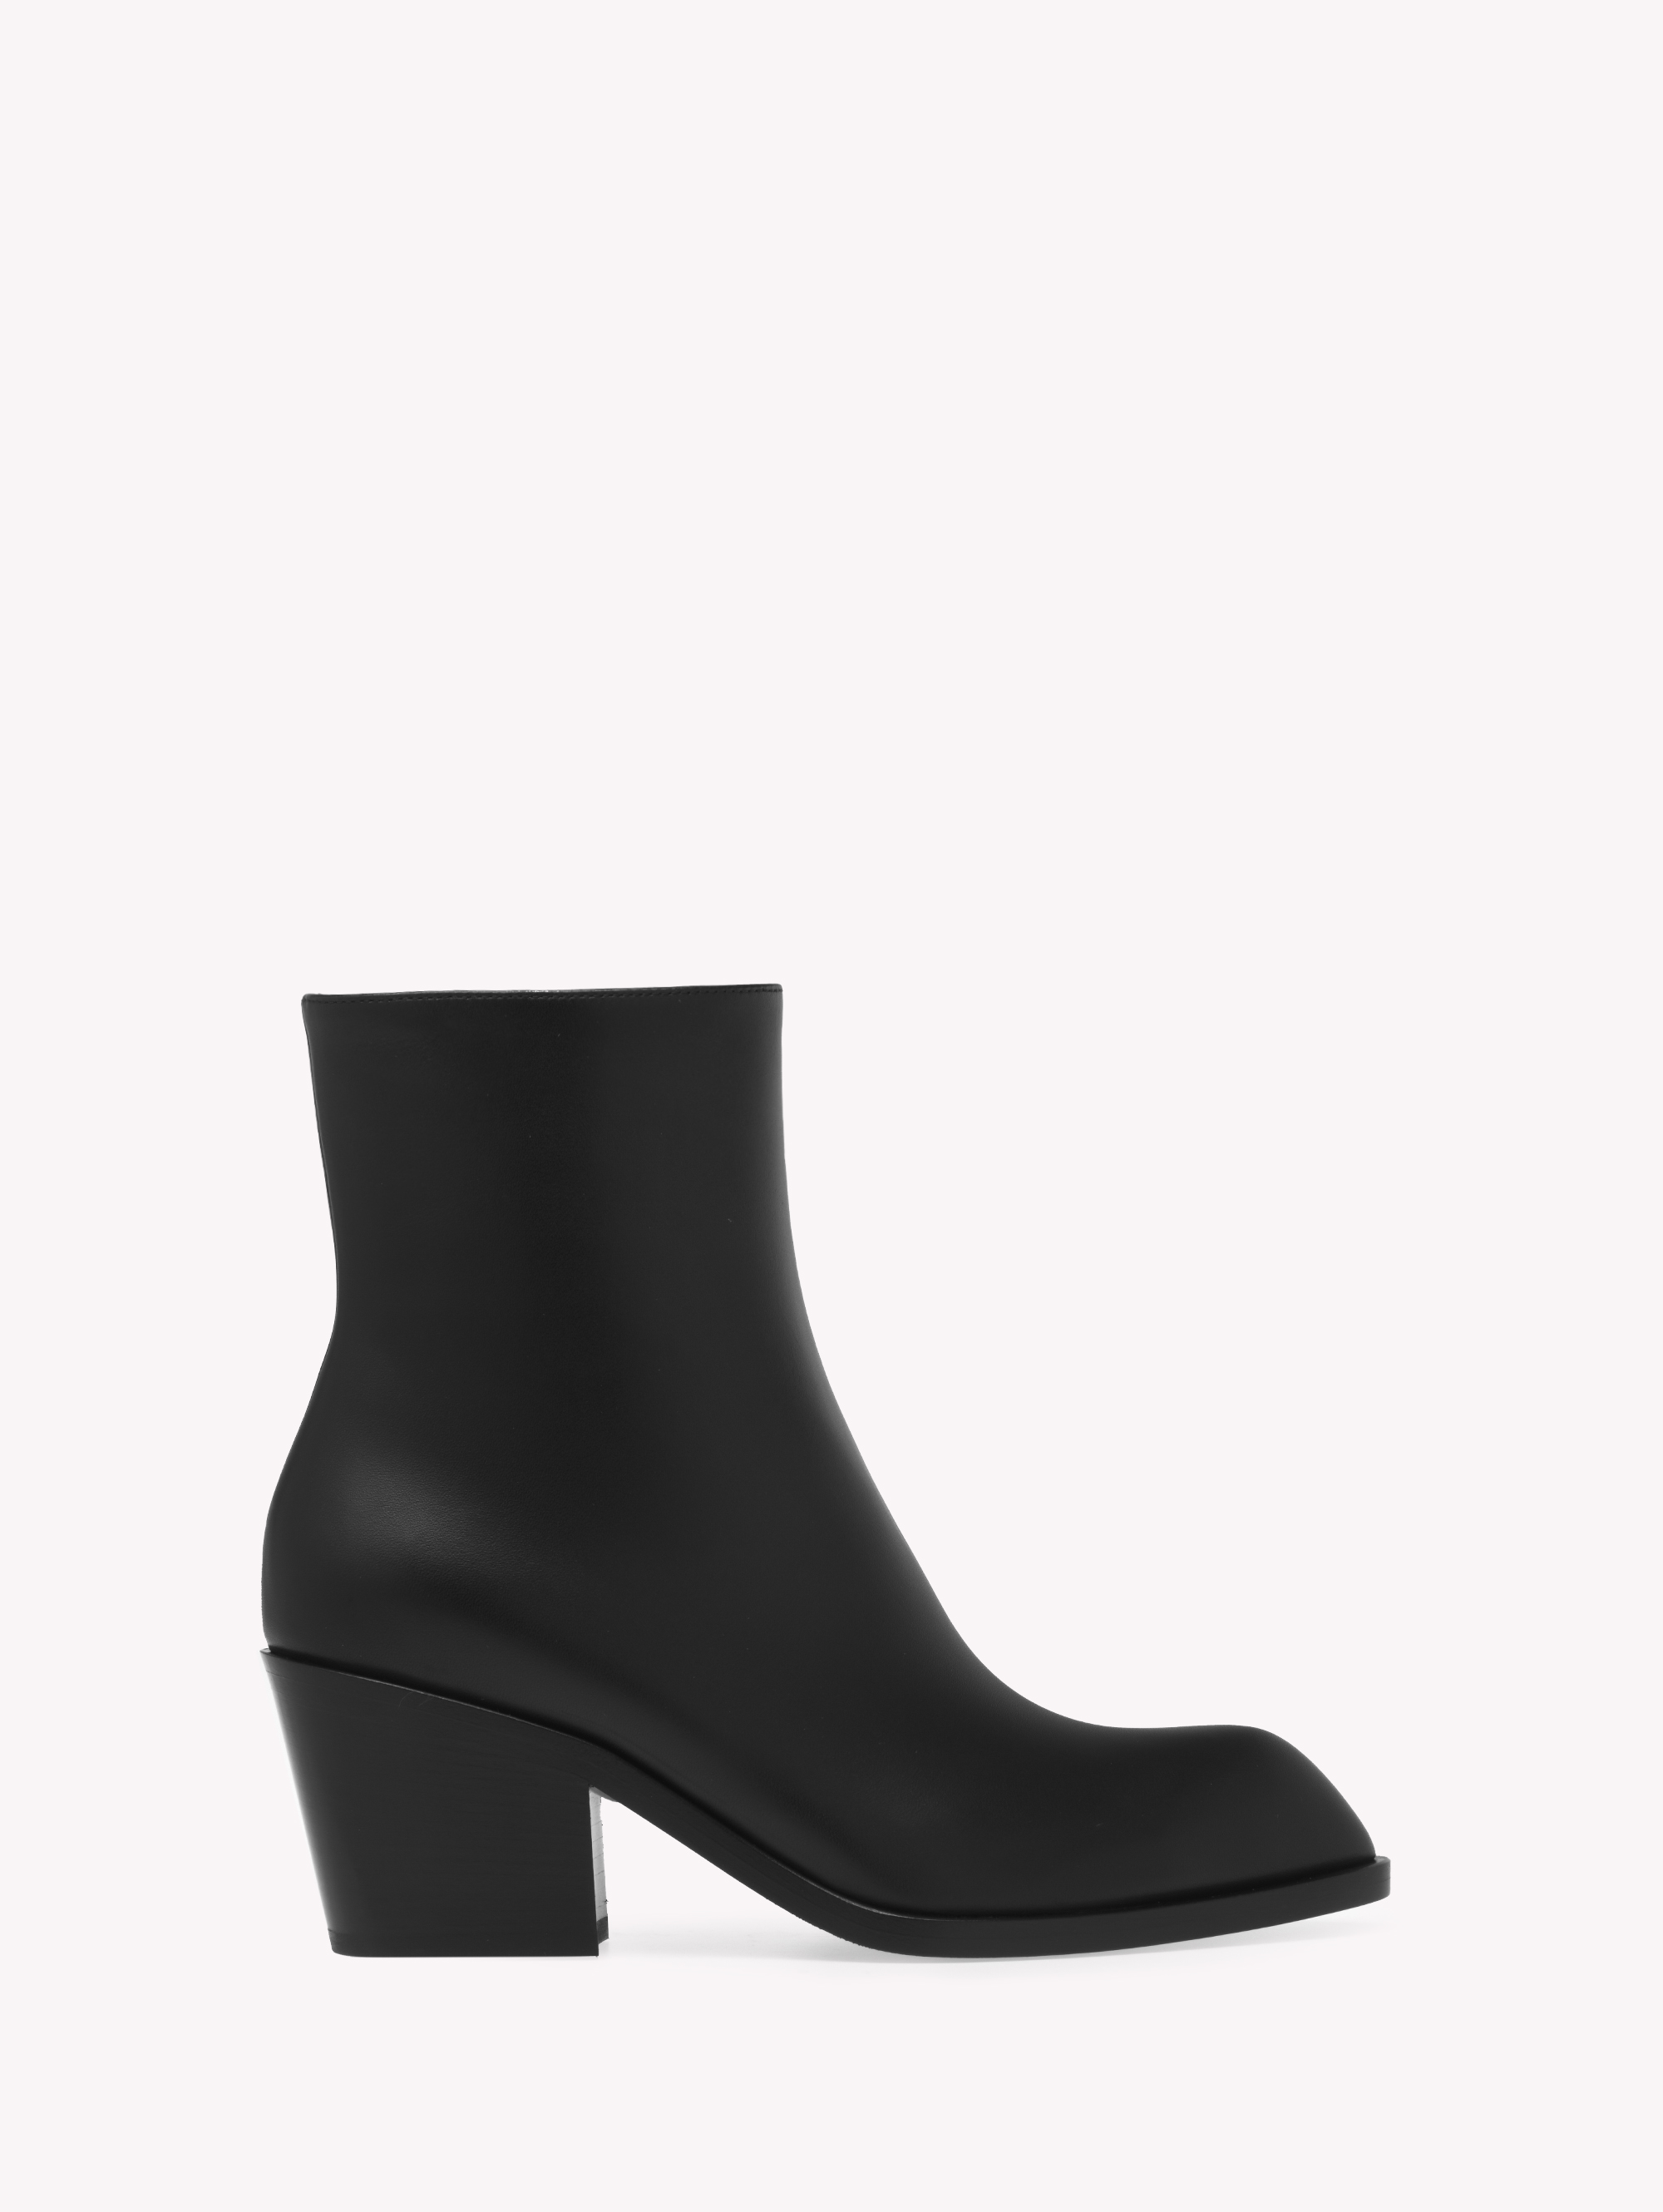 Ankle Boots for Women WEDNESDAY BOOTIE | Gianvito Rossi